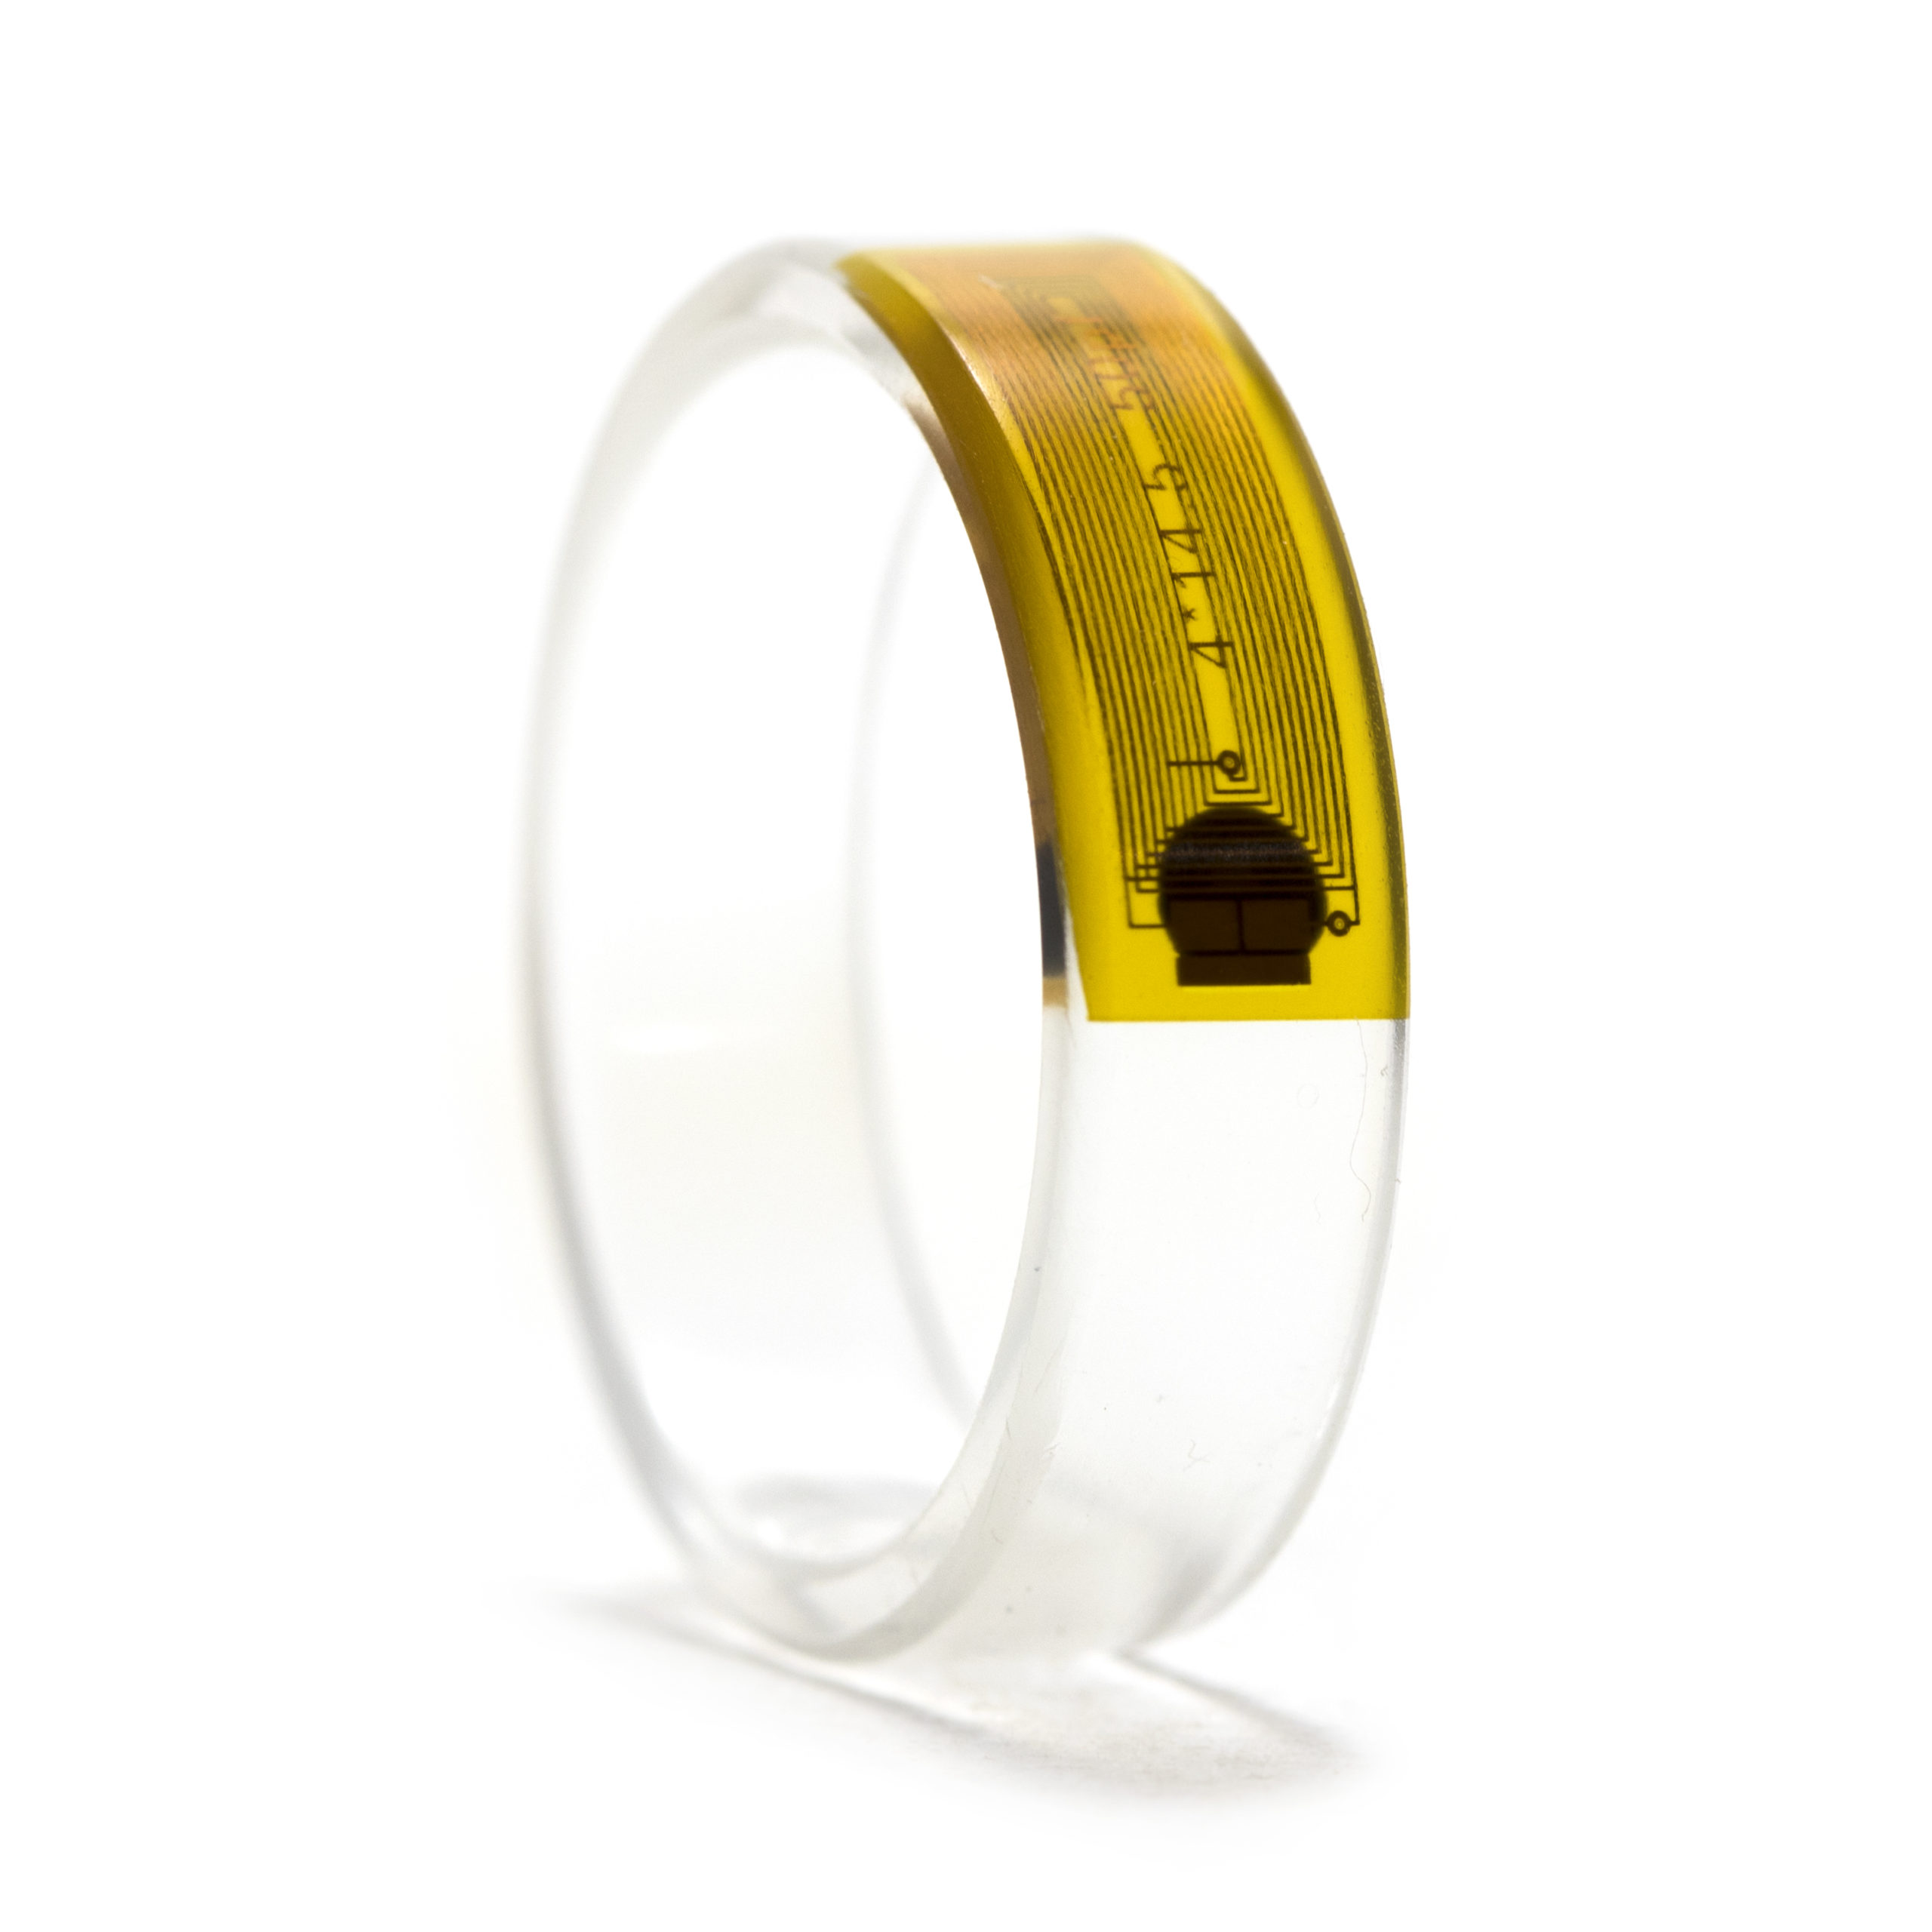 Smartshare NFC Ring - Alluminum Alloy RFID Technology Rings For NFC Mobile  Phone